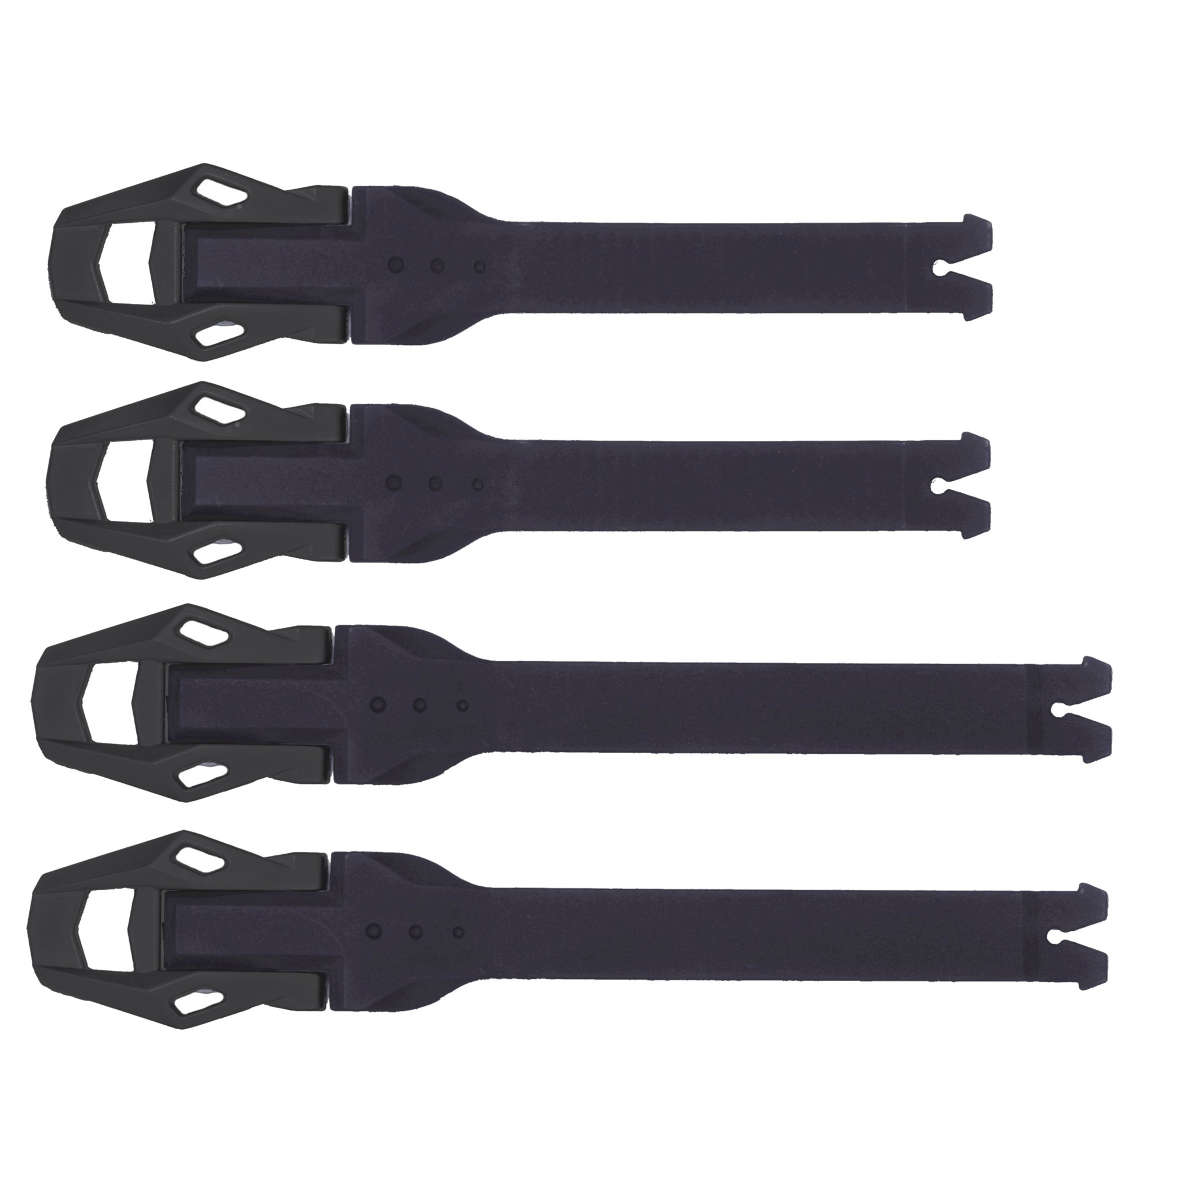 Scott Replacement Buckle and Strap Kit 250/350 Black/Black